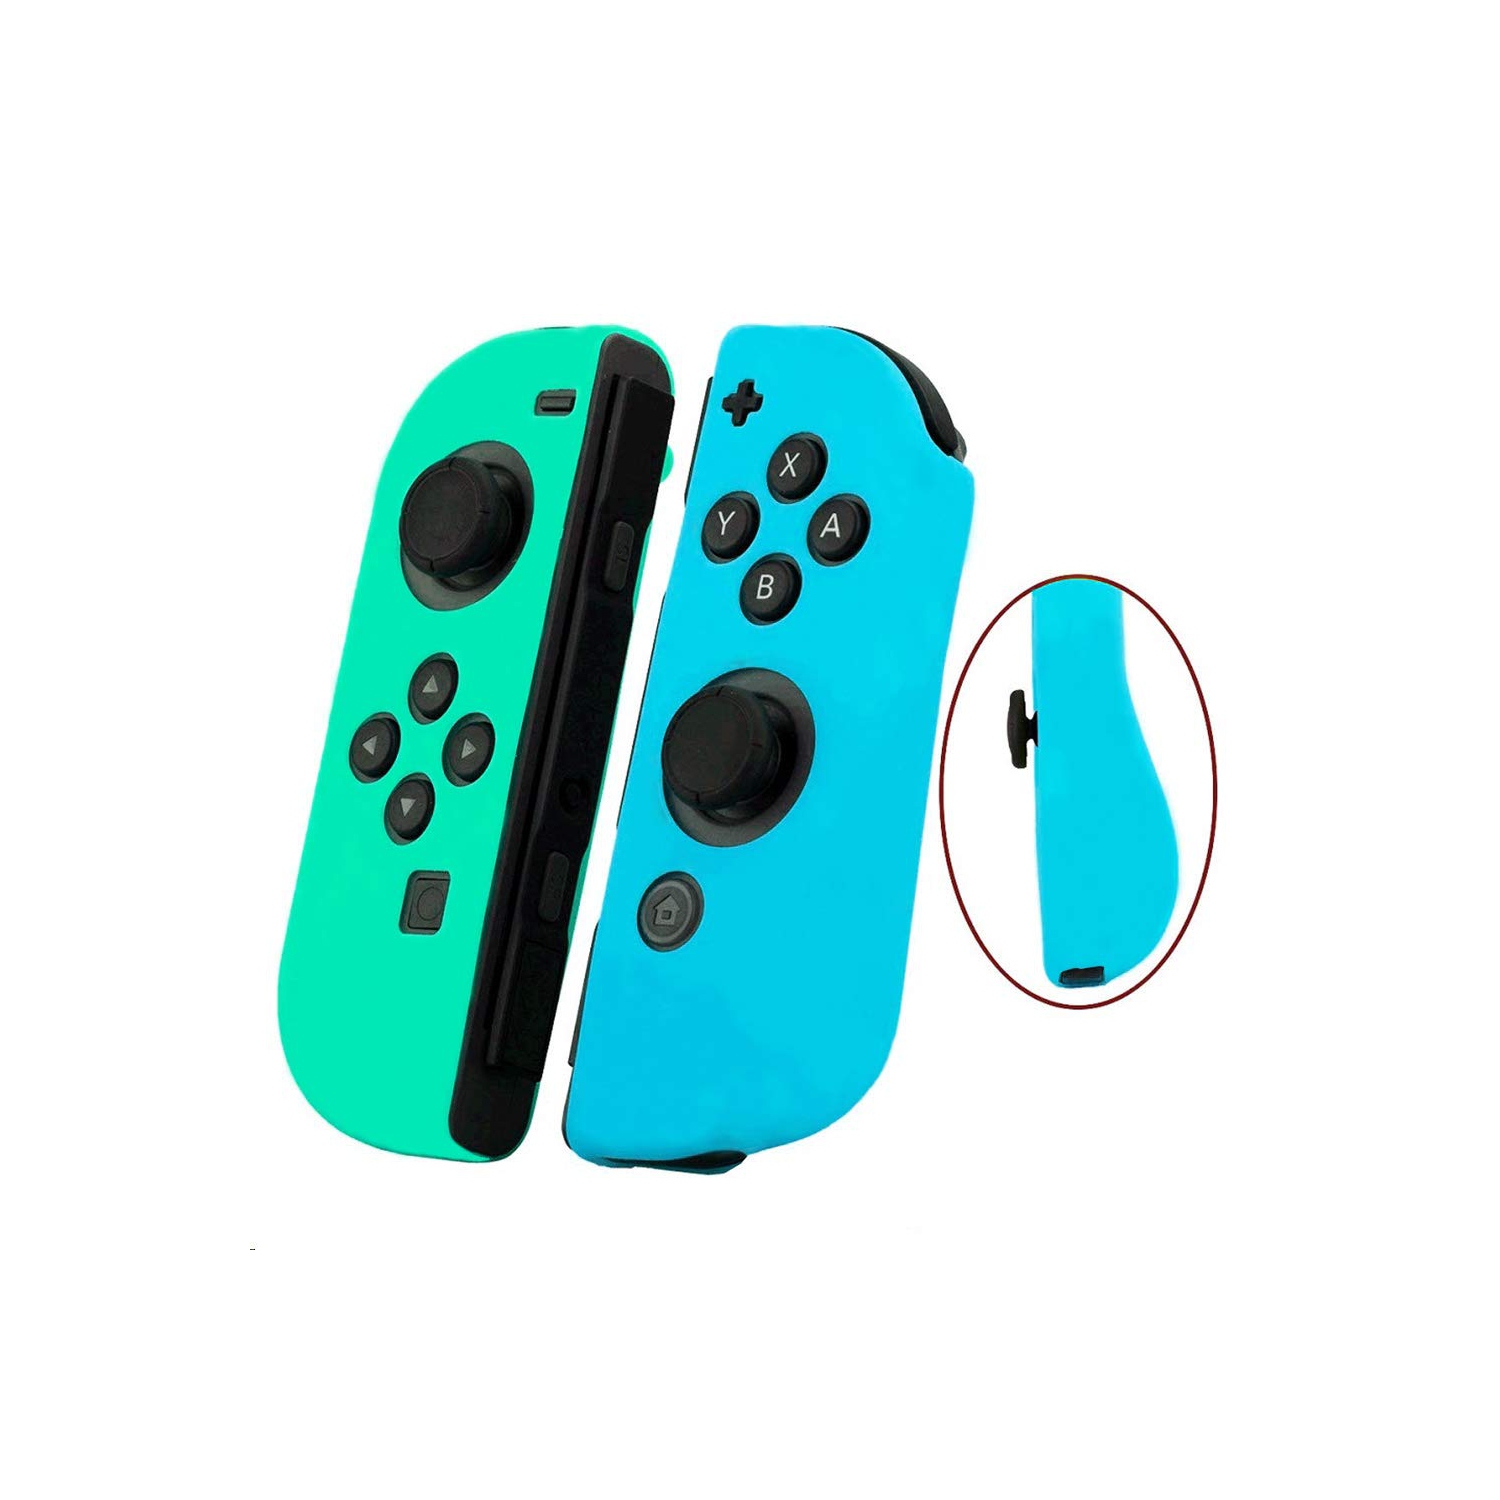 Animal Crossing Silicone Case for Switch Joycon: Anti-Slip Protector with Gel Grip Guard for Joy Cons Controllers.